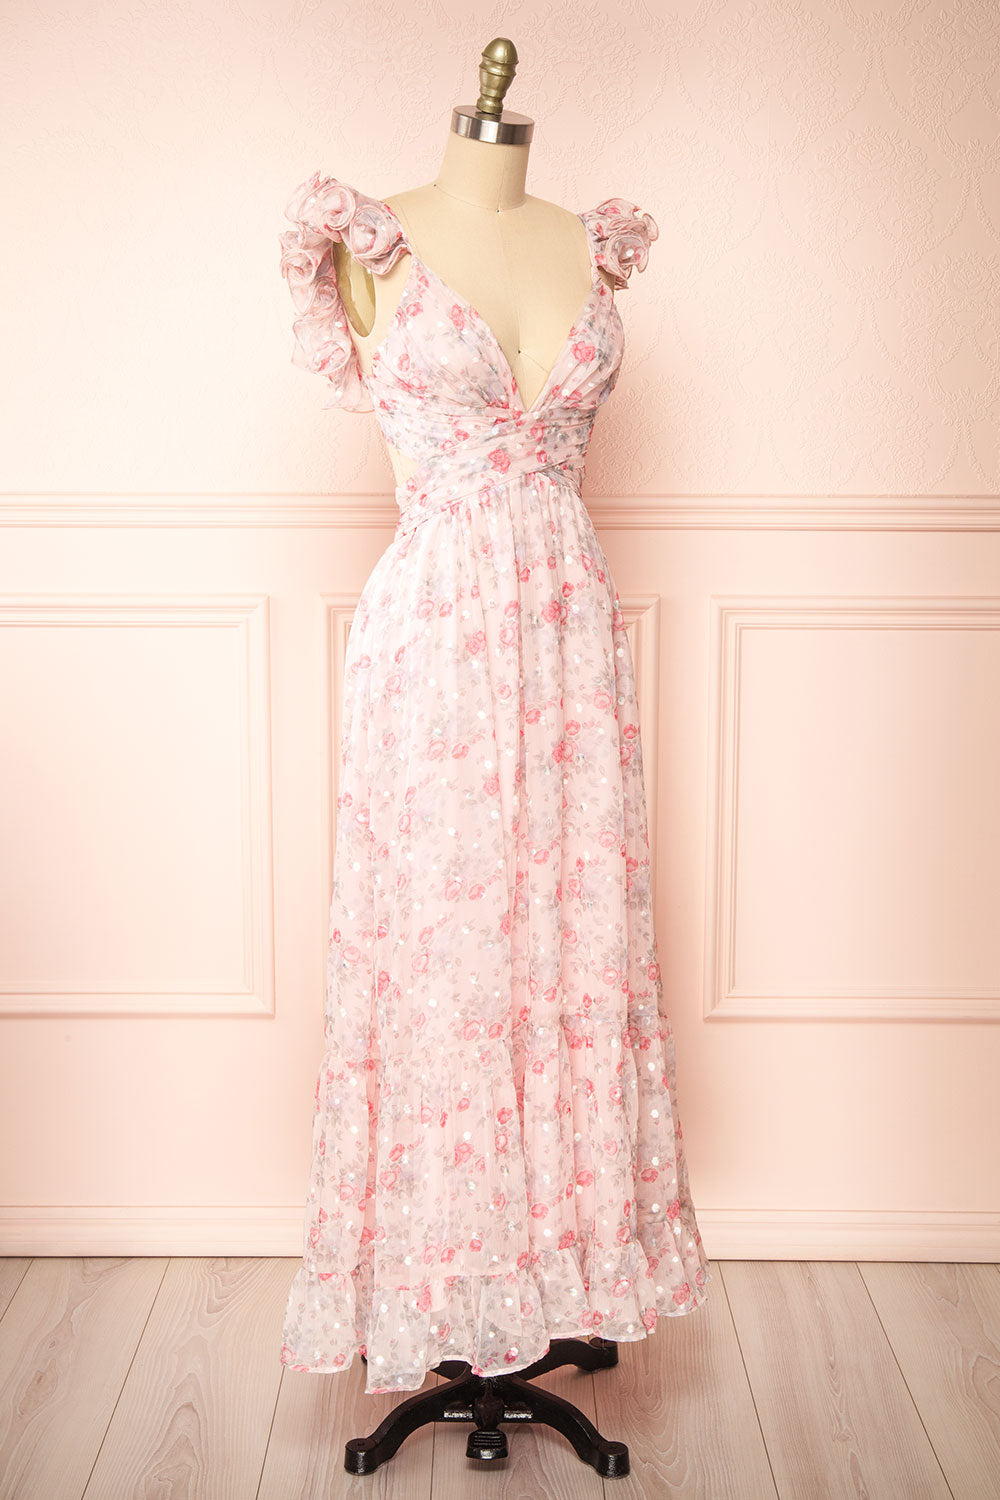 Alvaine Long Pink Floral Dress w/ Ruffled Straps | Boutique 1861 sid eview